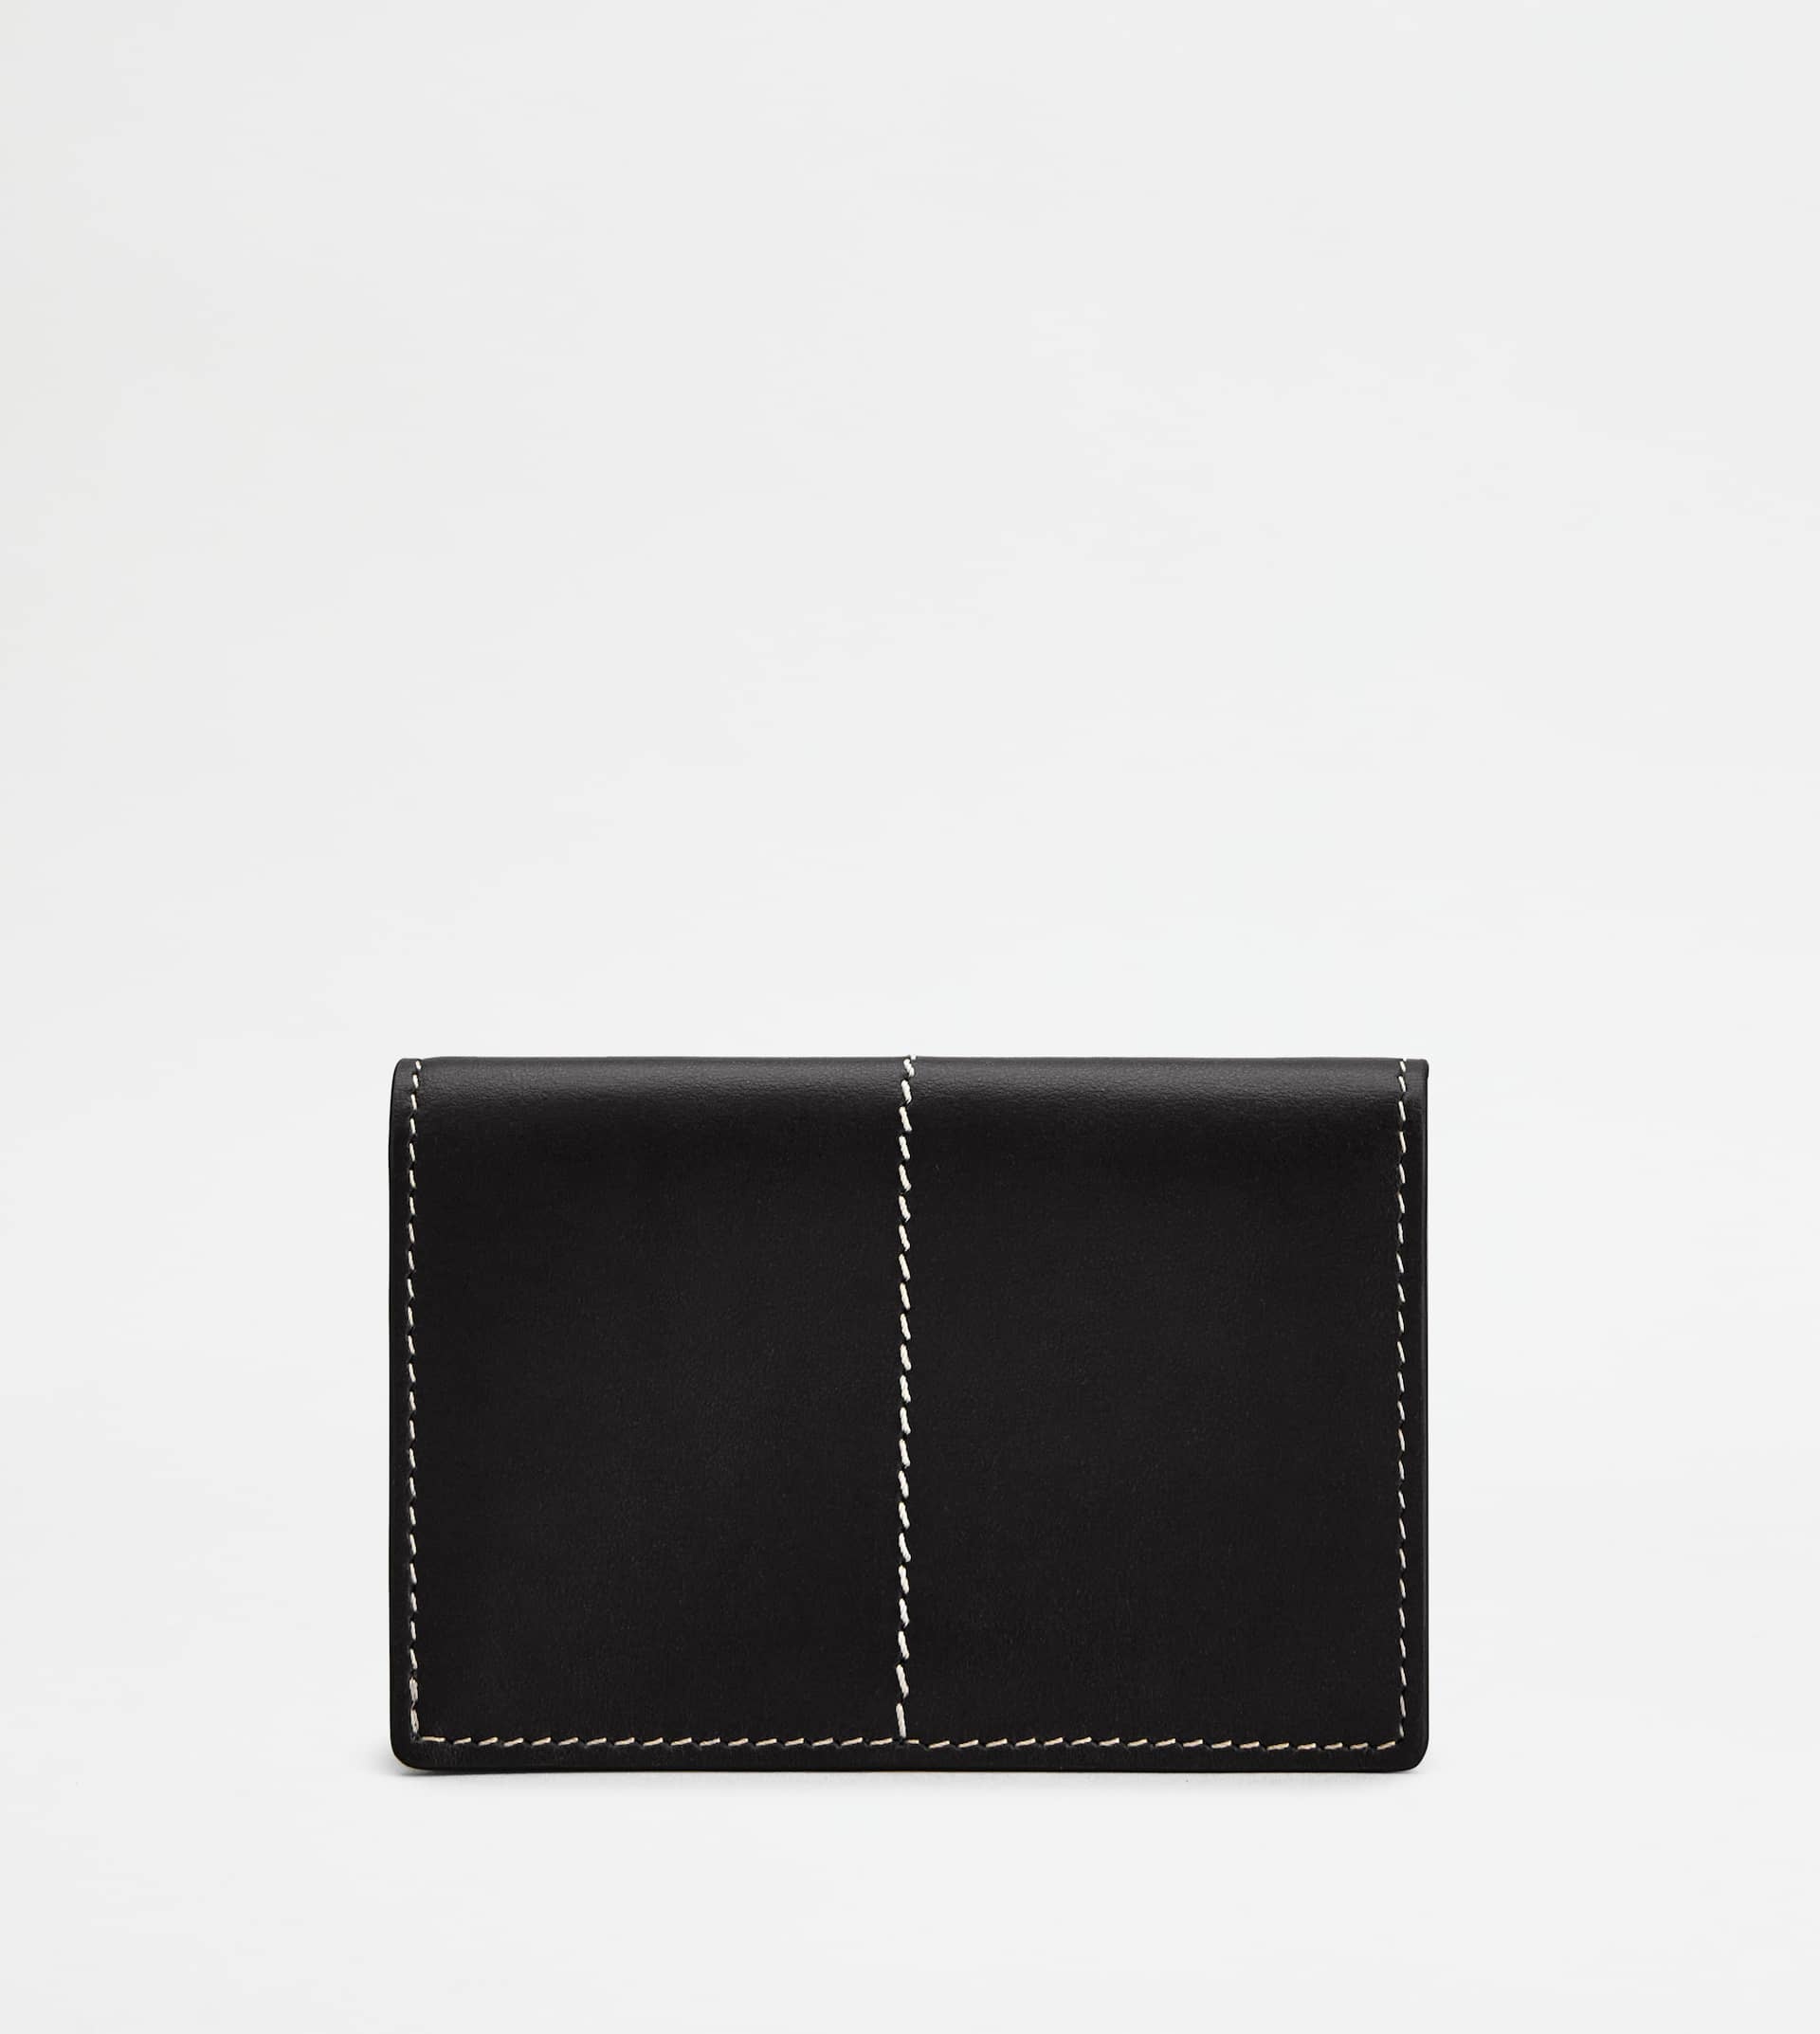 BUSINESS CARD HOLDER IN LEATHER - BLACK - 3